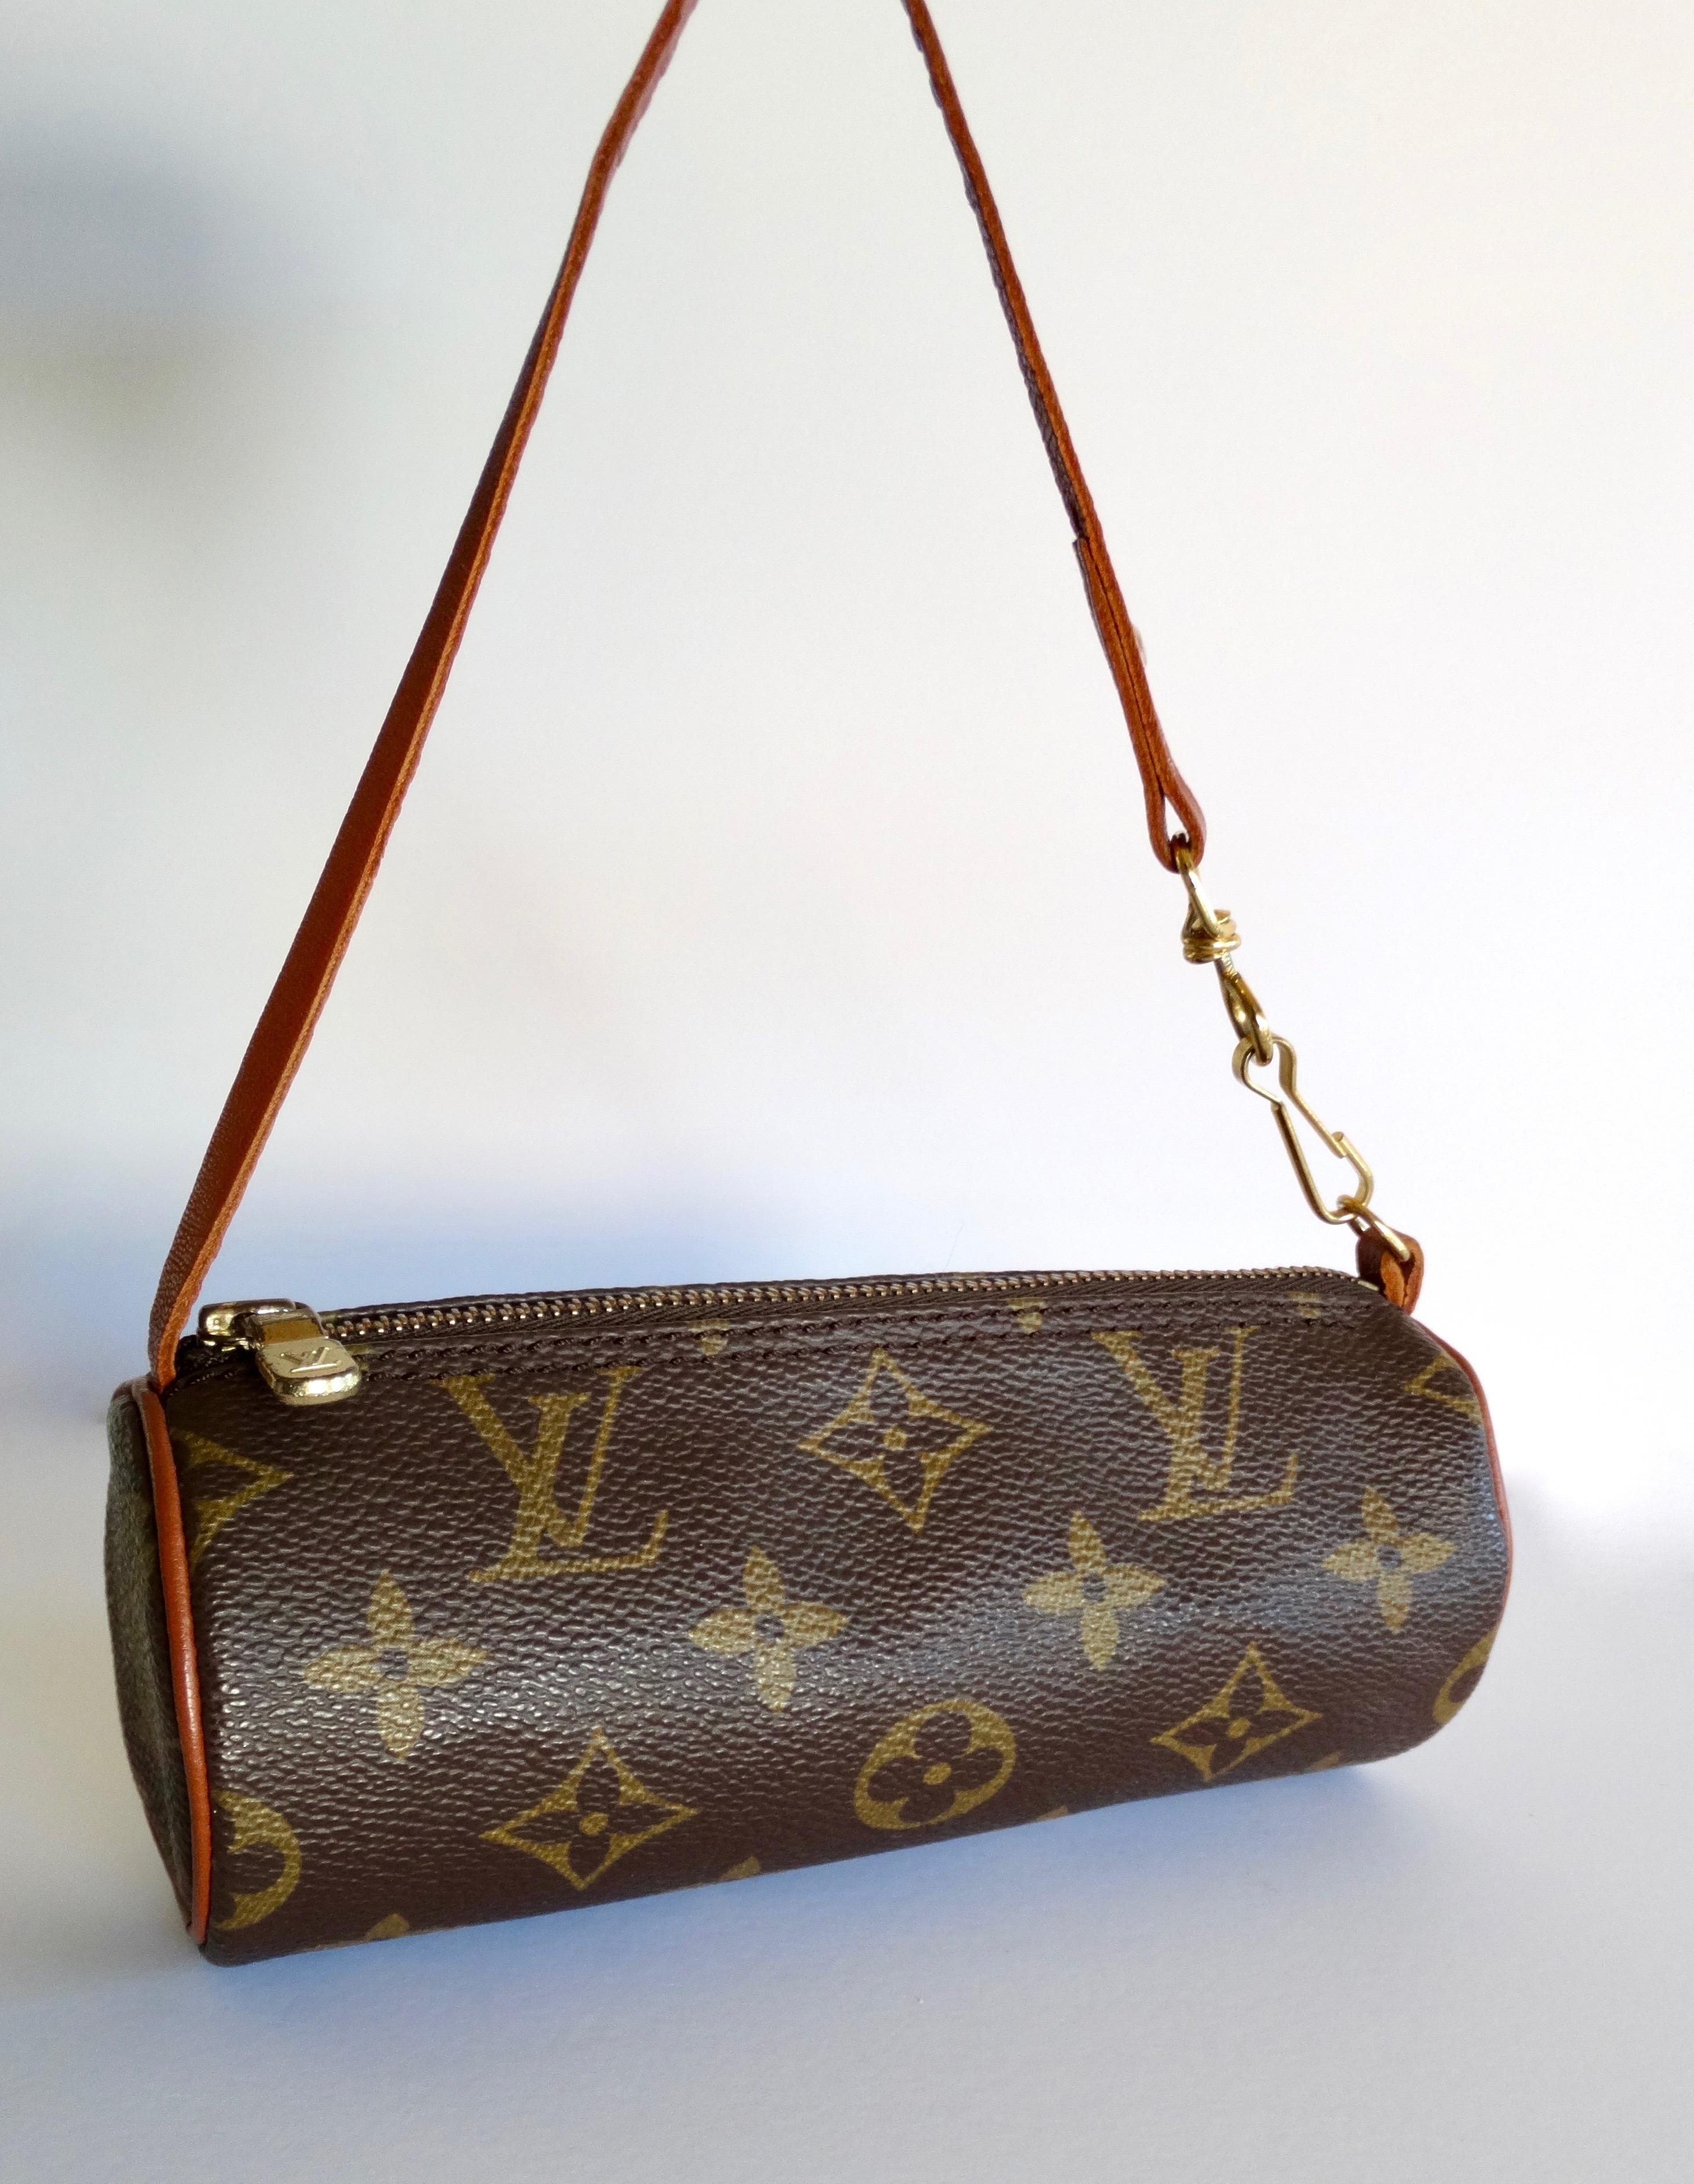 Complete or start your Louis Vuitton collection with this adorable bag! Originally designed in 1966, this mini pochette is circa 1990s and is the smaller version of the popular Papillon handbag. Crafted from Louis Vuitton's signature monogram